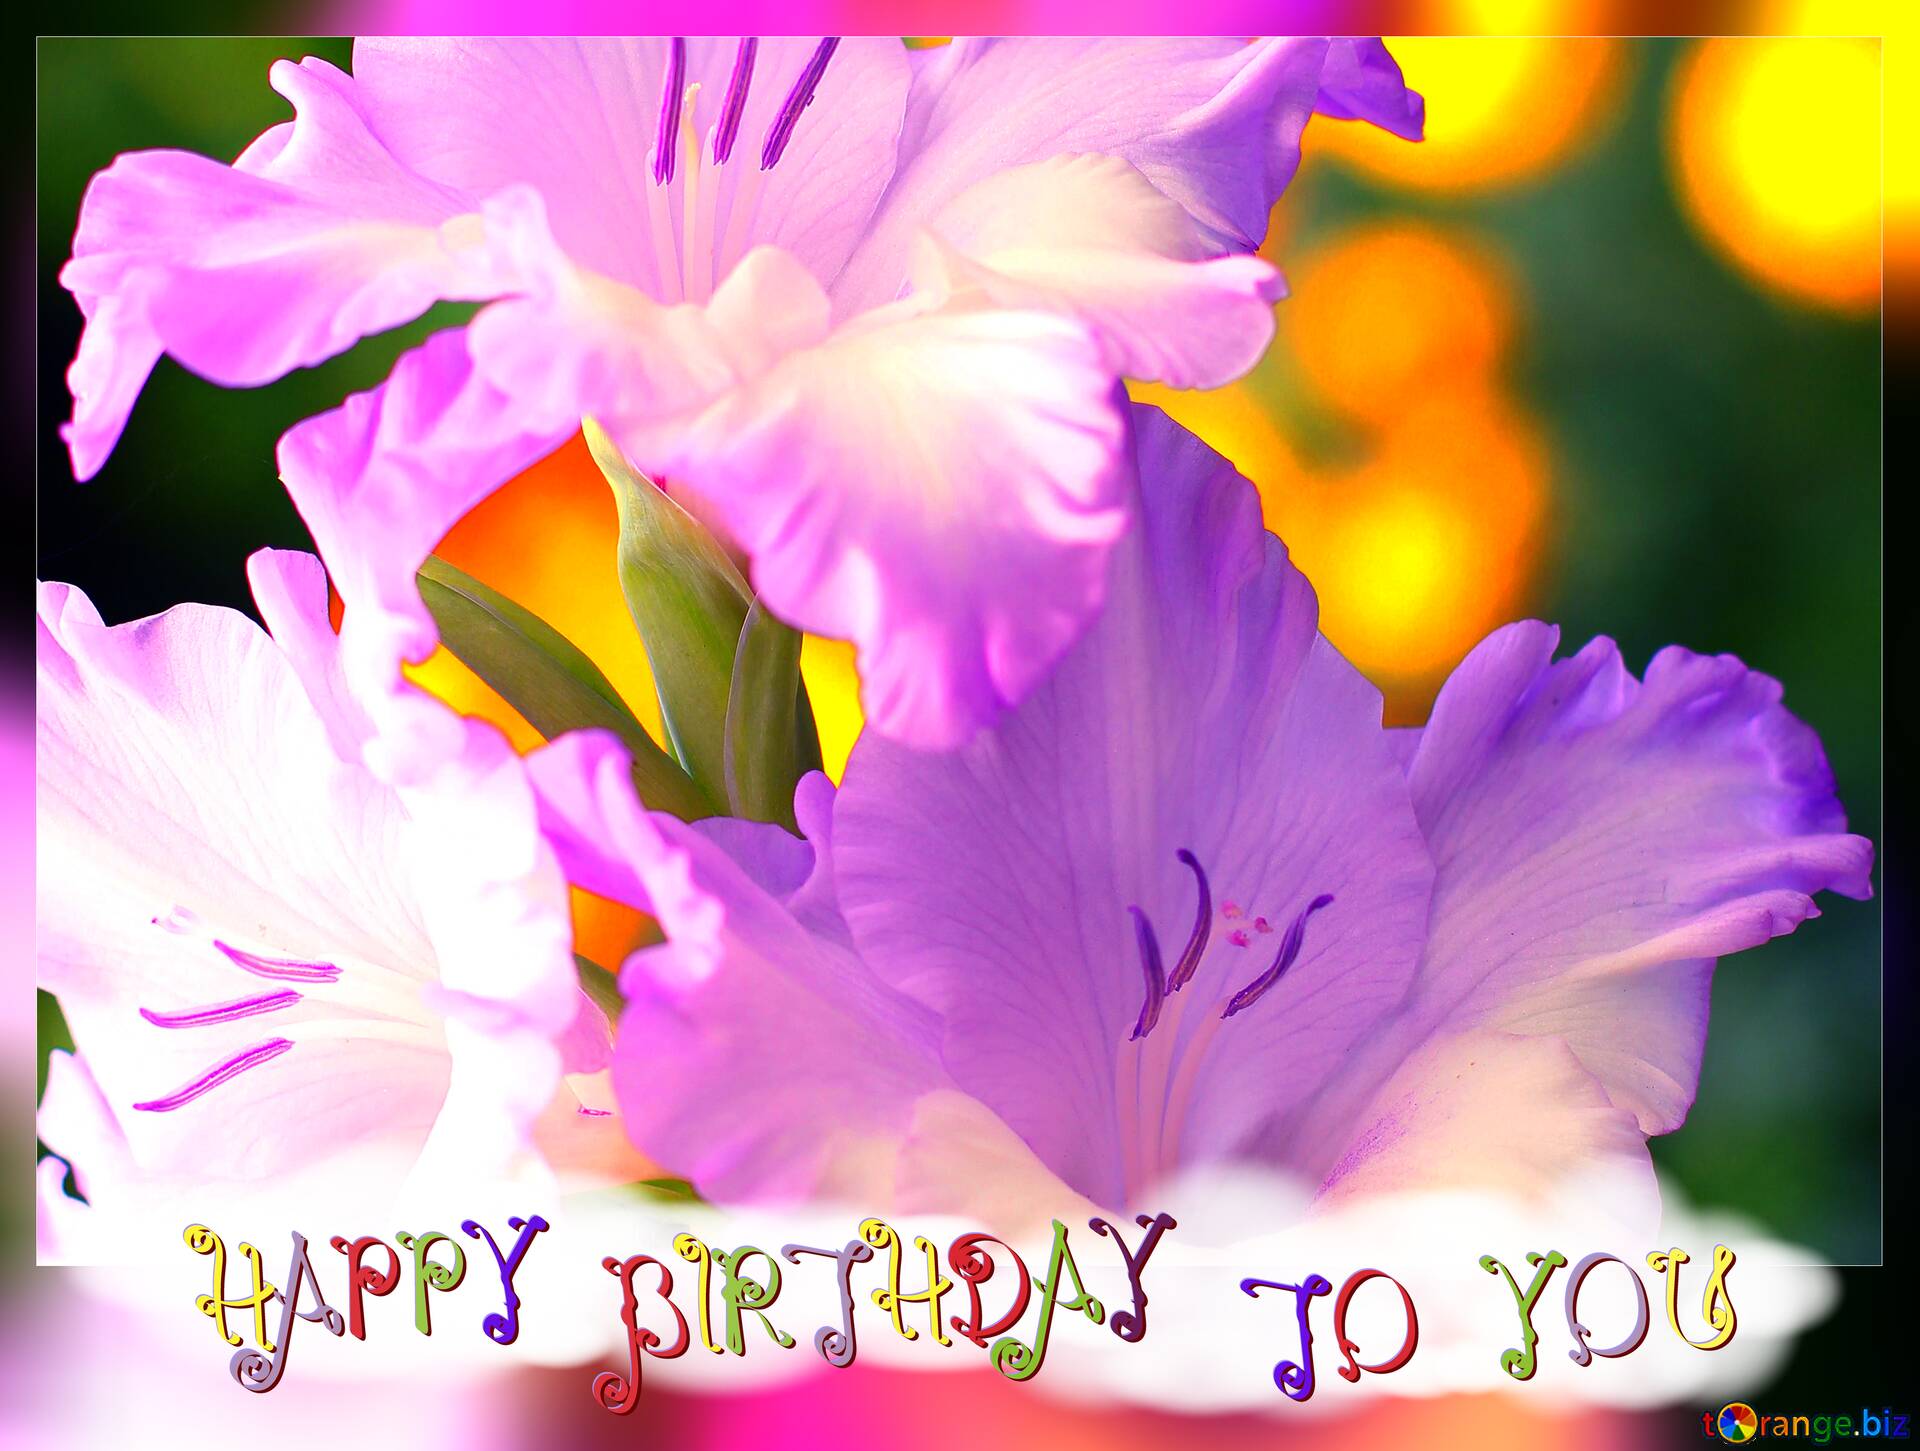 Download Free Picture Beautiful Flowers For Congratulations Frame Happy Birthday On Cc By License Free Image Stock Torange Biz Fx 215819